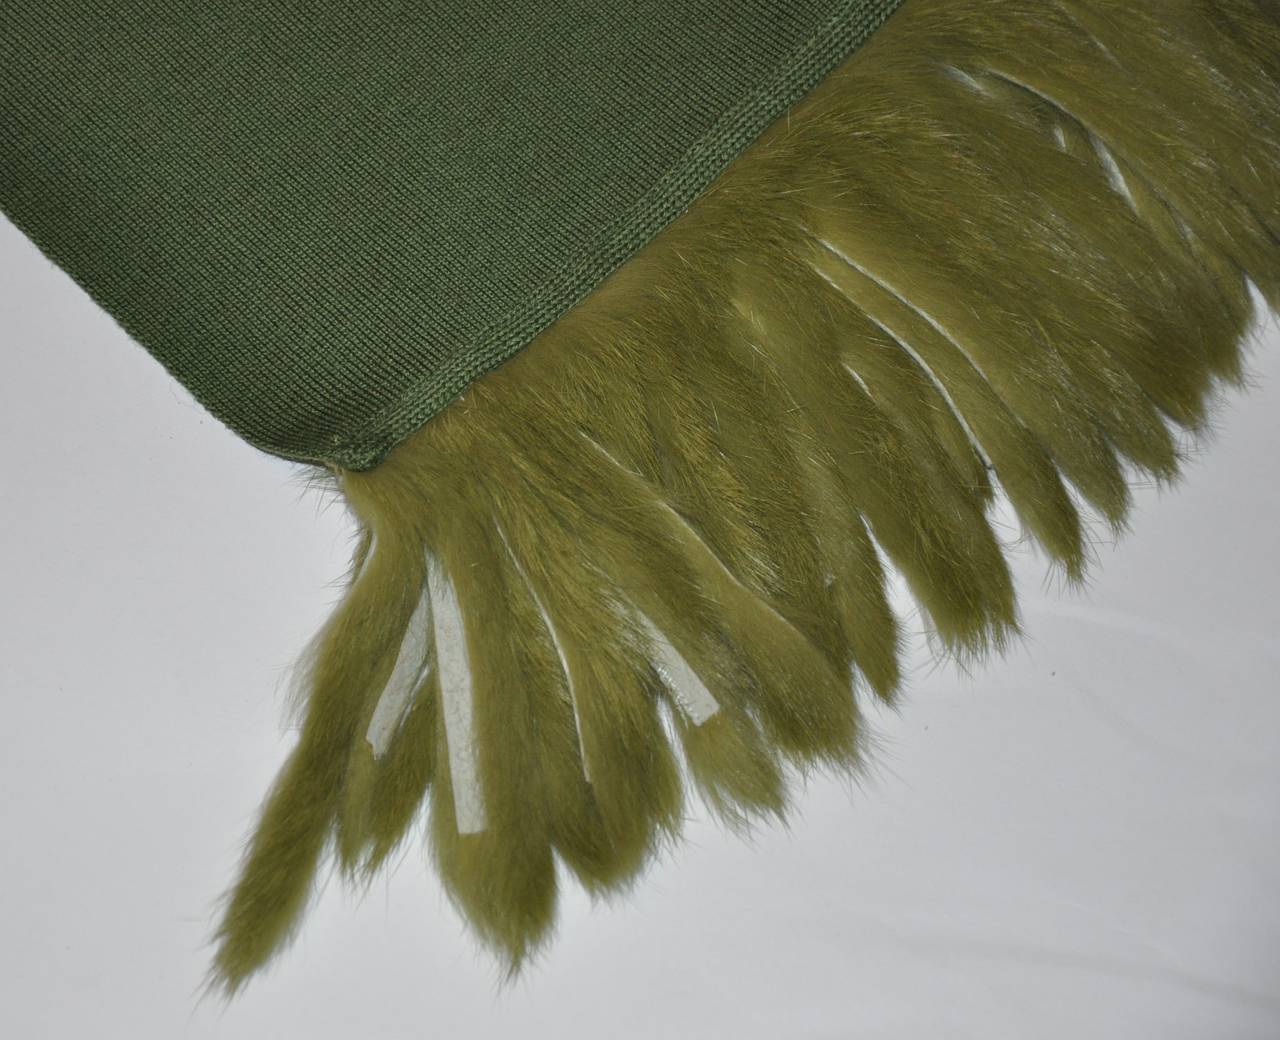 This wonderfully warm olive green merino wool jersey scarf is accented with matching fur/suede in olive green fringe. The scarf measures 21